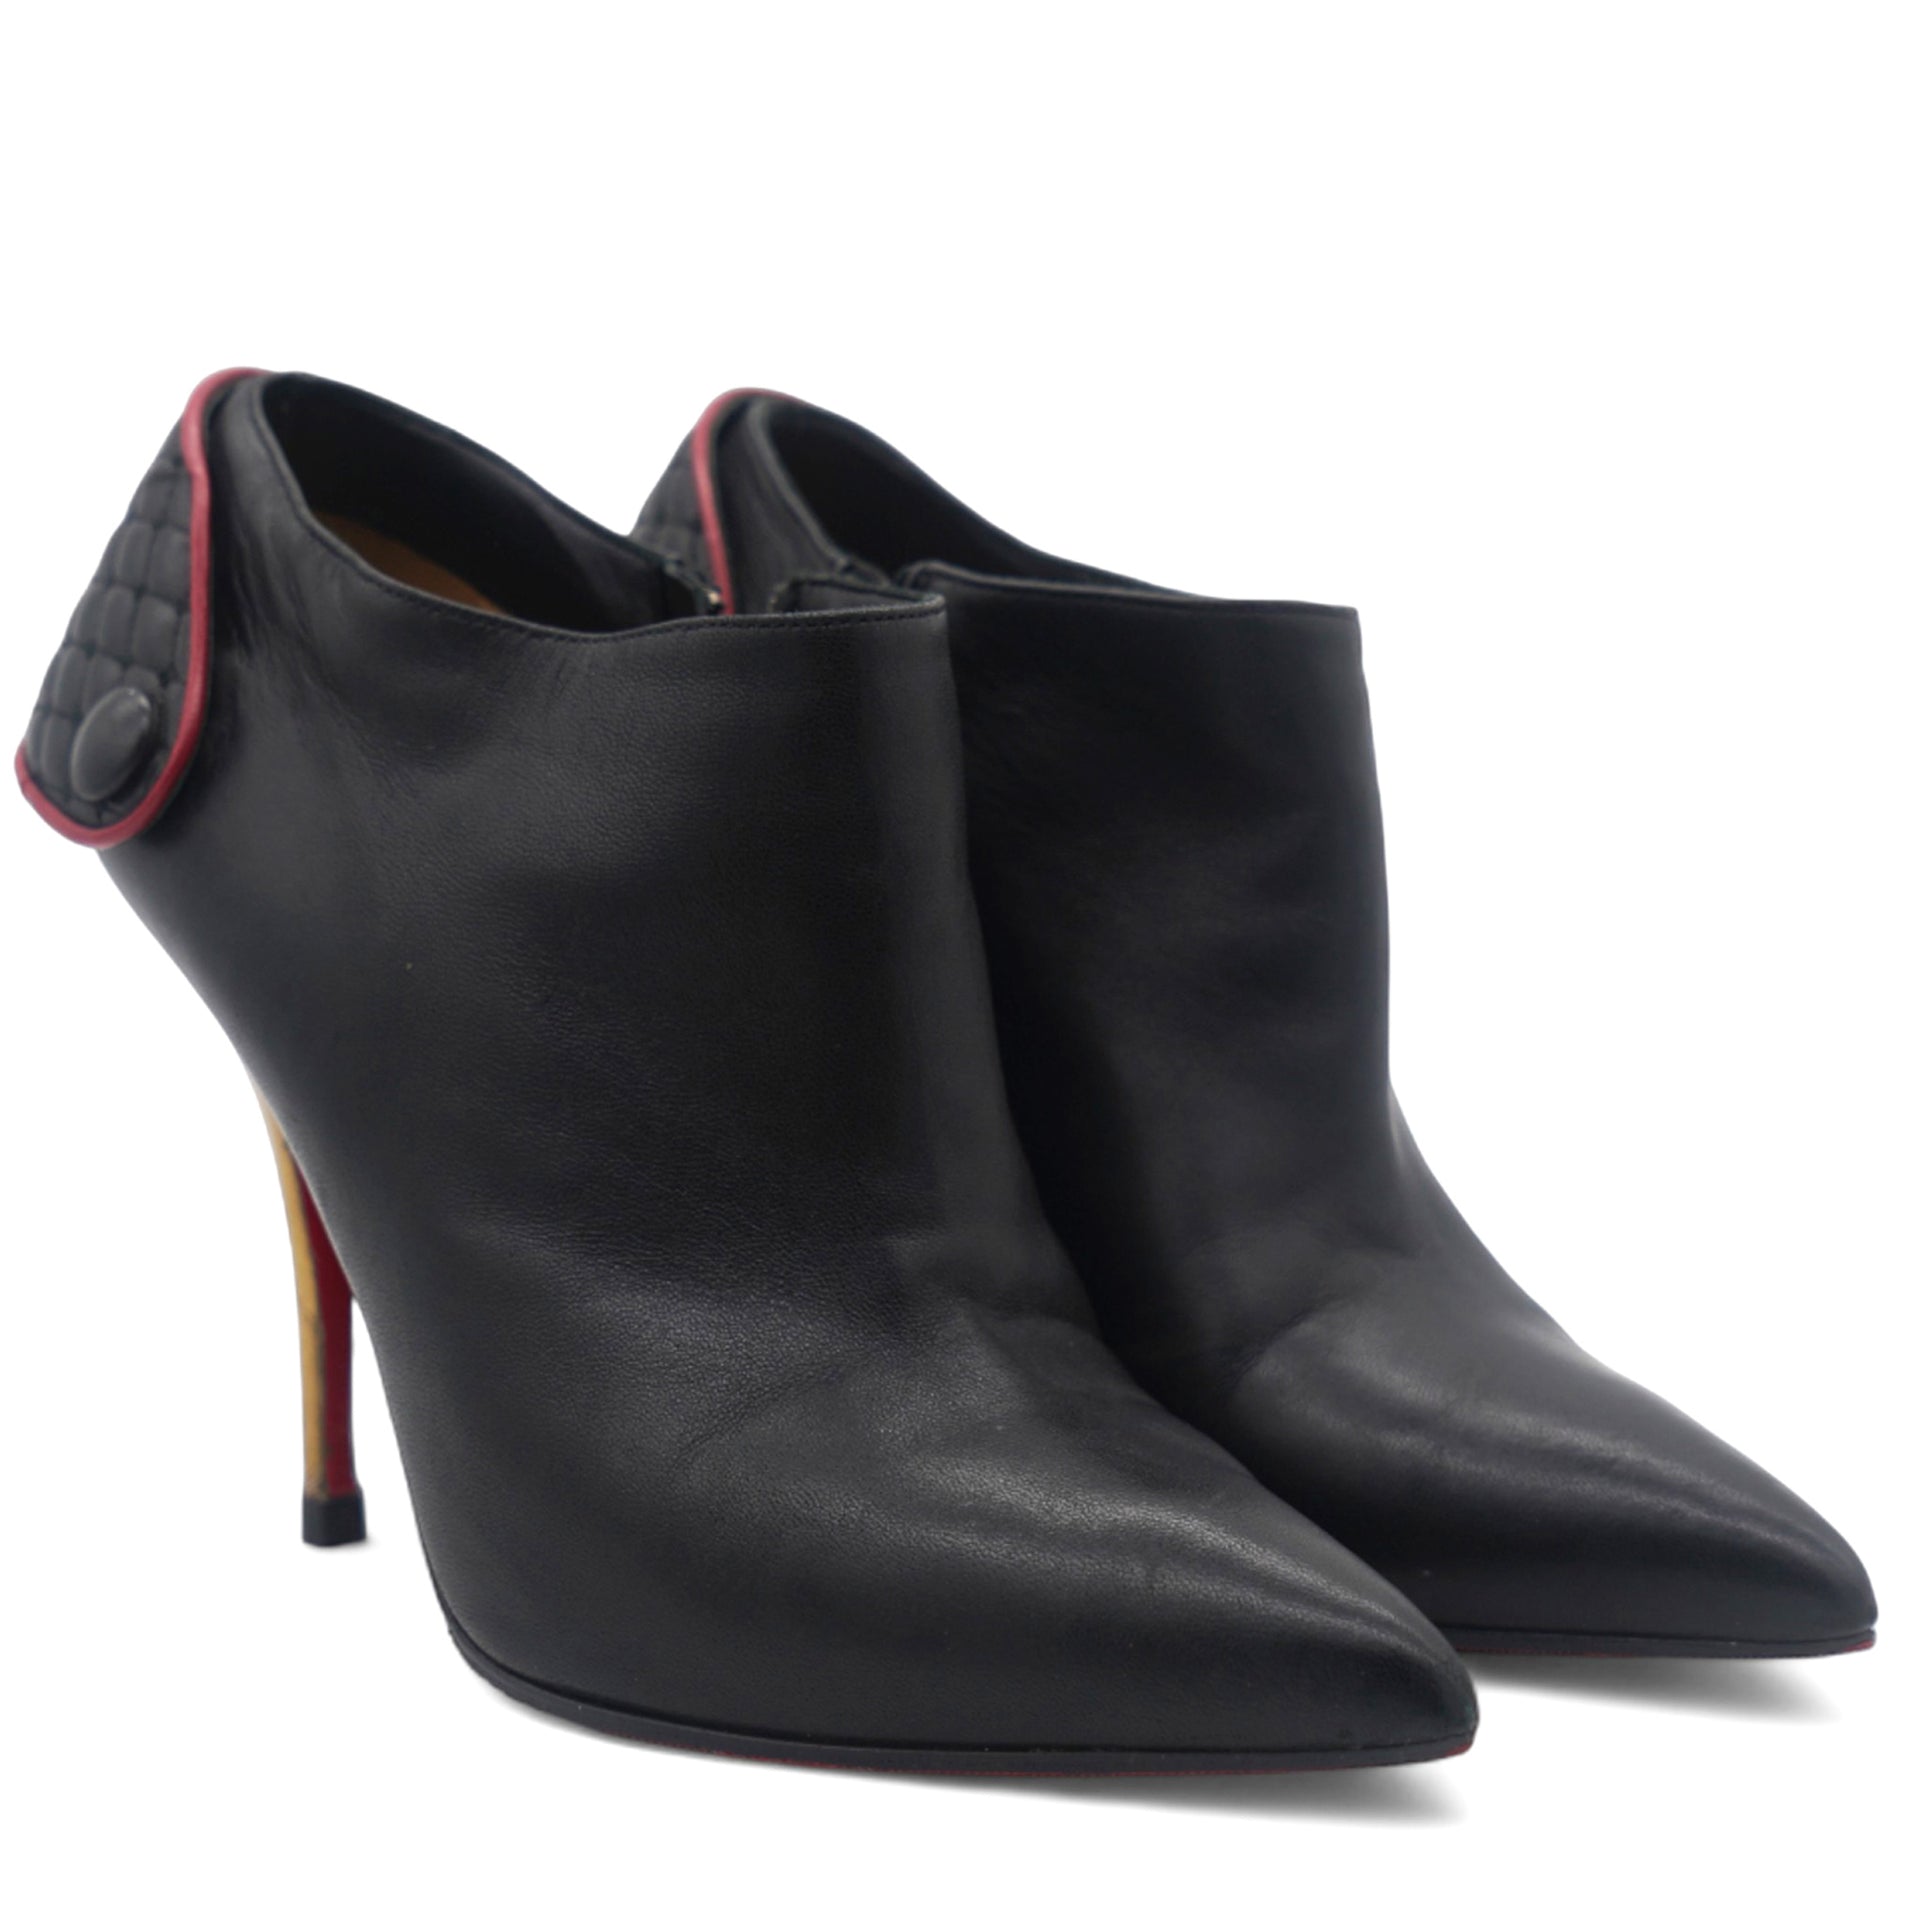 Nappa Huguette 120 Ankle Boots Black 37